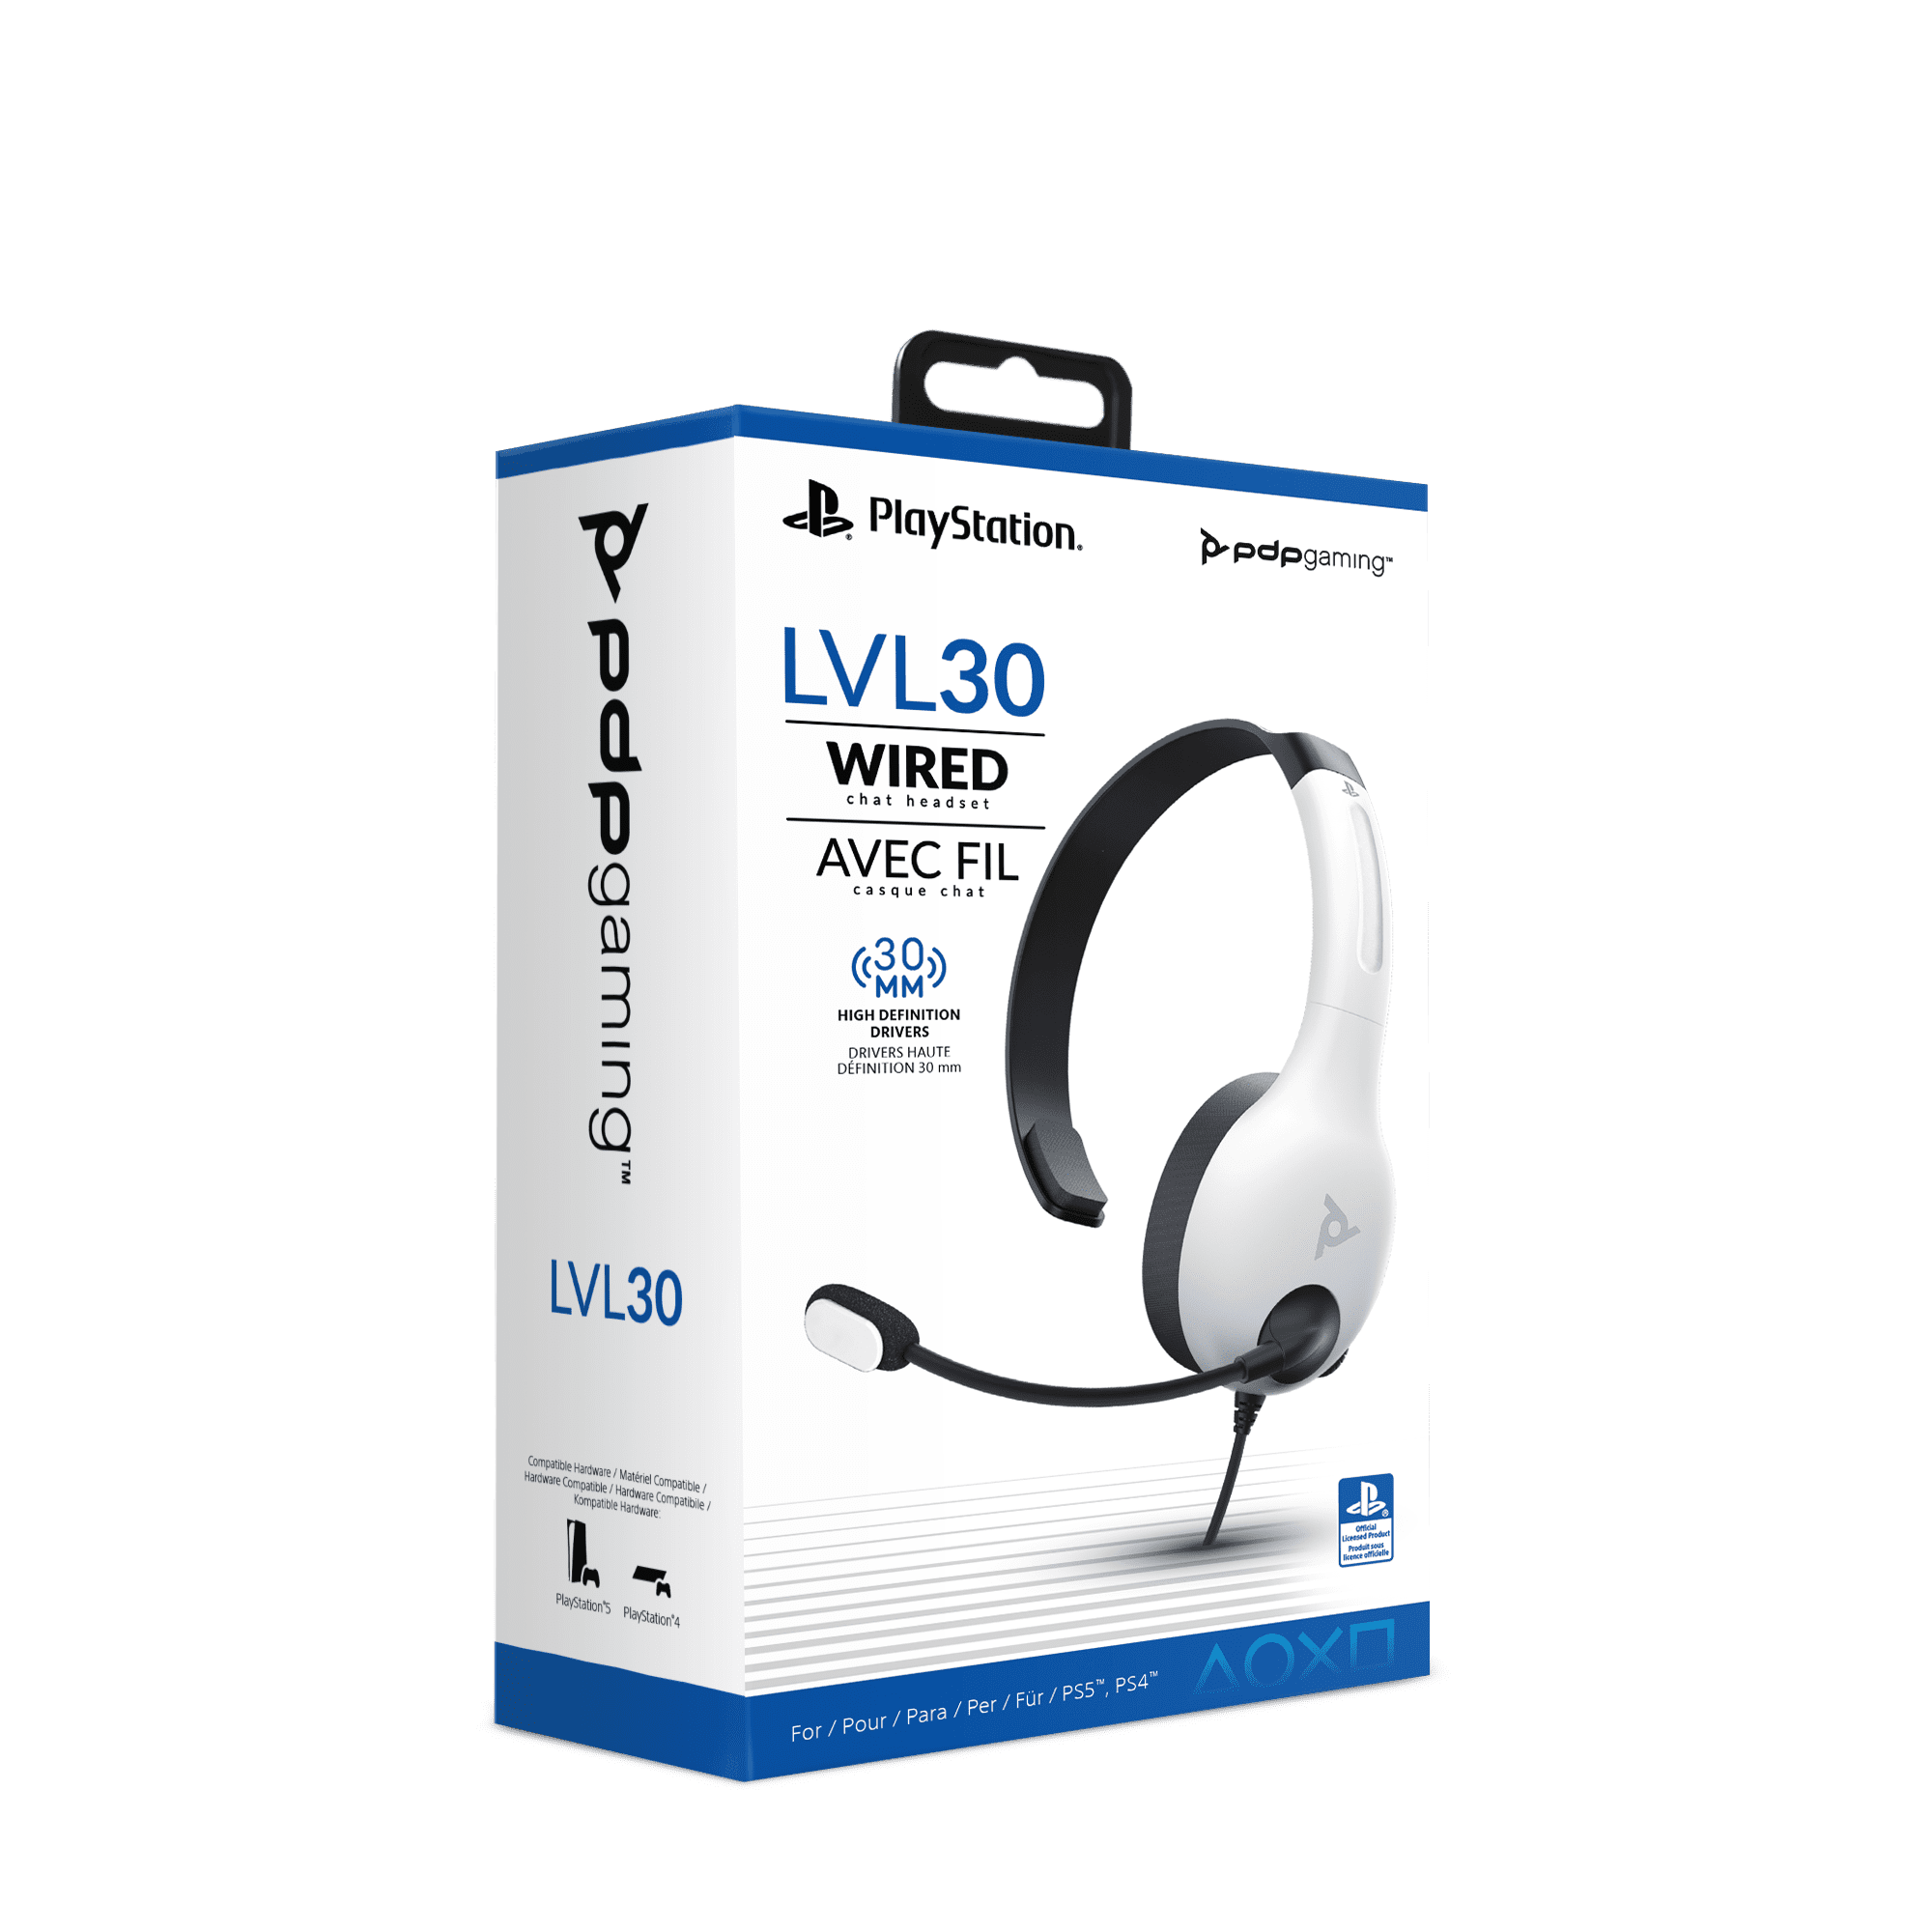 LVL30 Wired Chat Headset for PS4  Fight fatigue with the ability